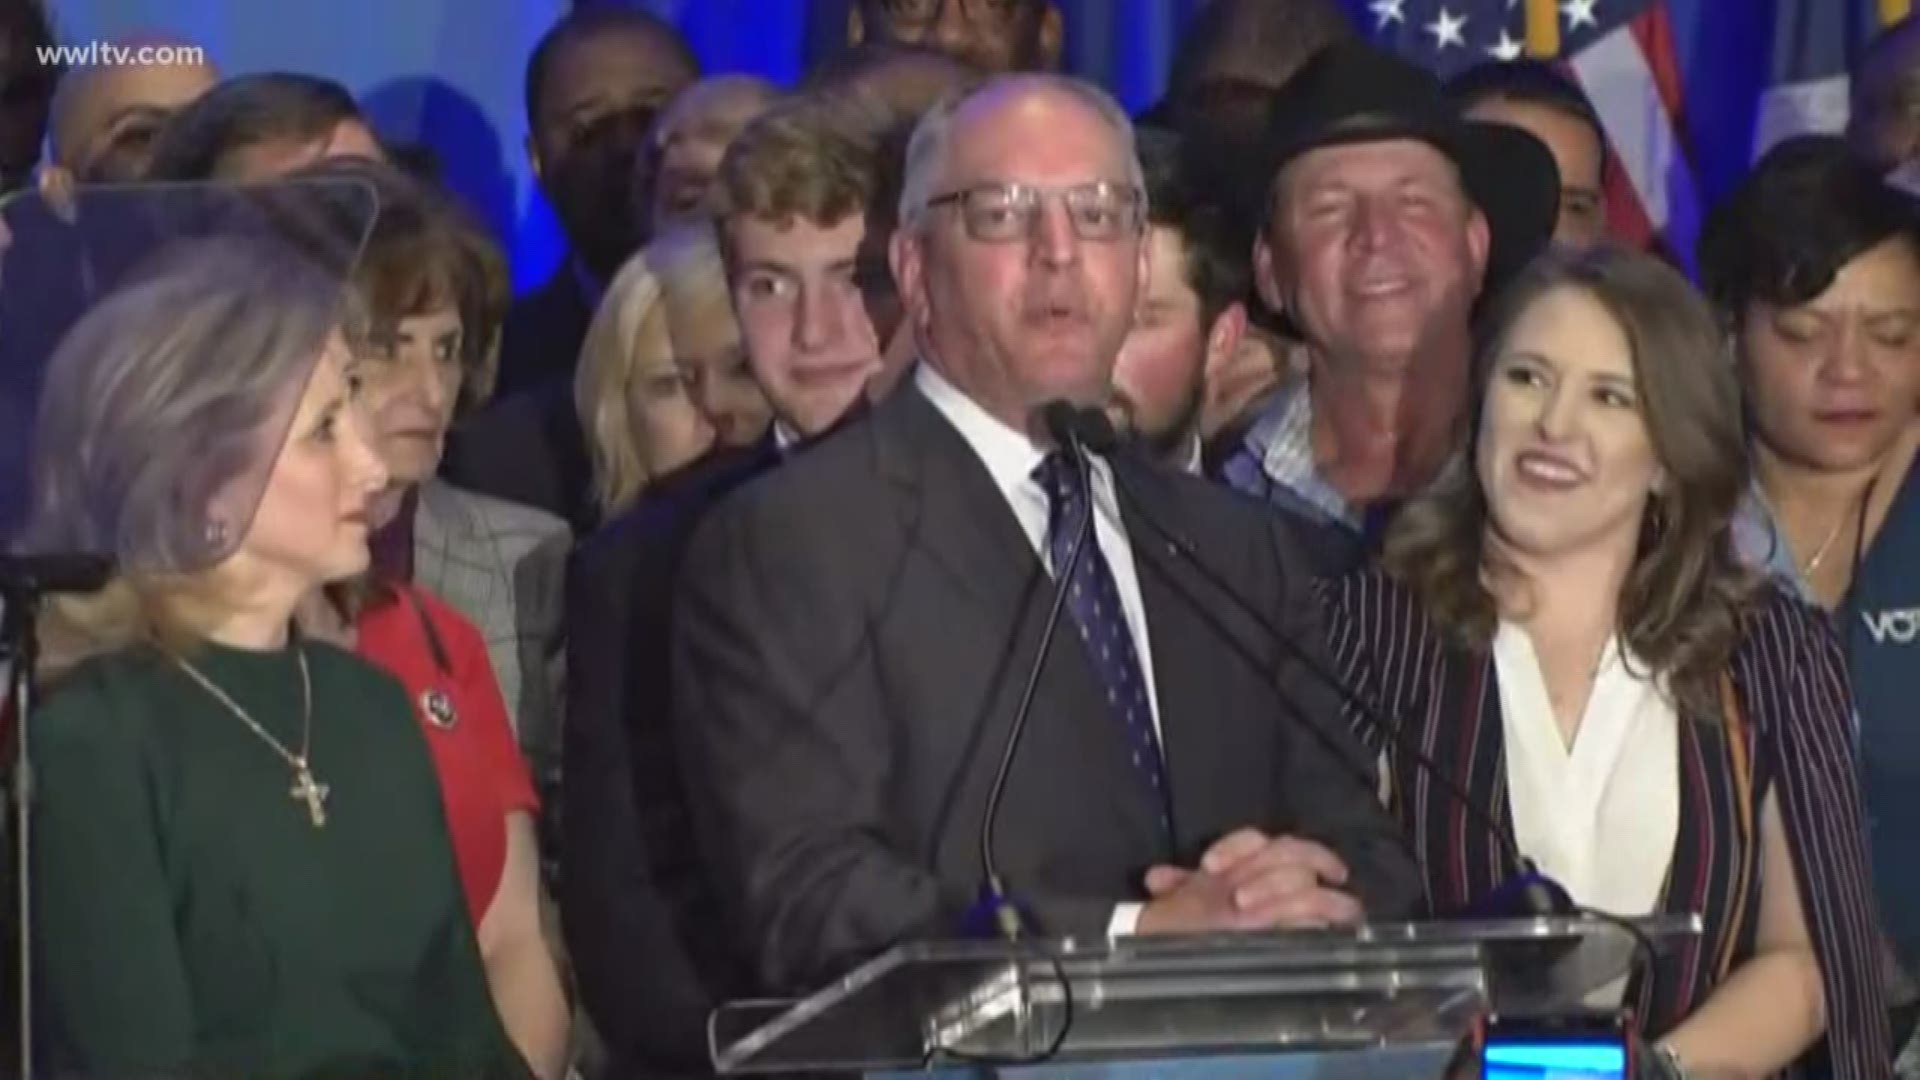 John Bel Edwards speaks after winning reelection as Louisiana's governor